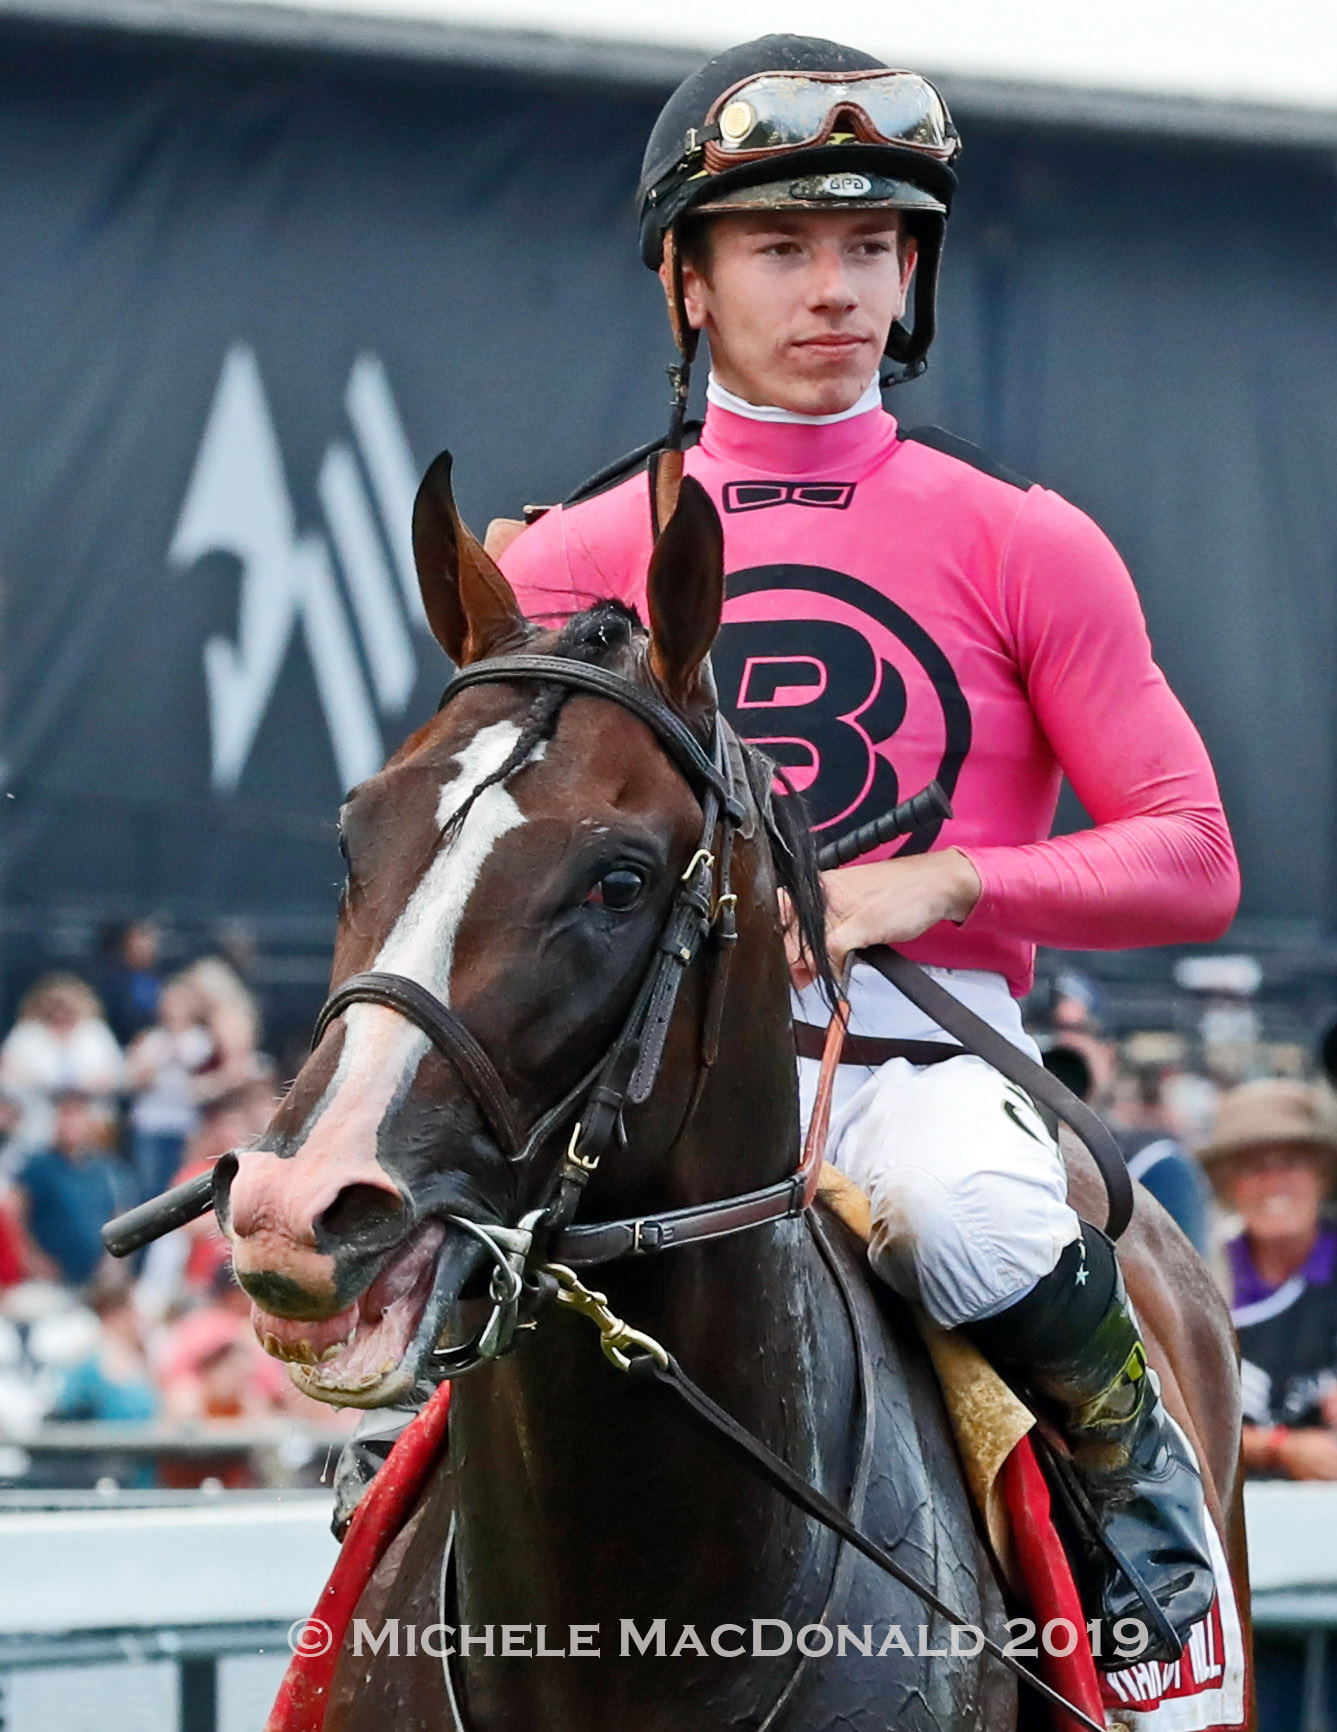 Gaffalione on Belmont favorite War Of Will: “He has all the raw, natural talent, he has the mindset, he has the intelligence. He’s already, in my opinion, one of the stars of the game,” says the rider’s agent, Matt Muzikar. Photo: Michele MacDonald